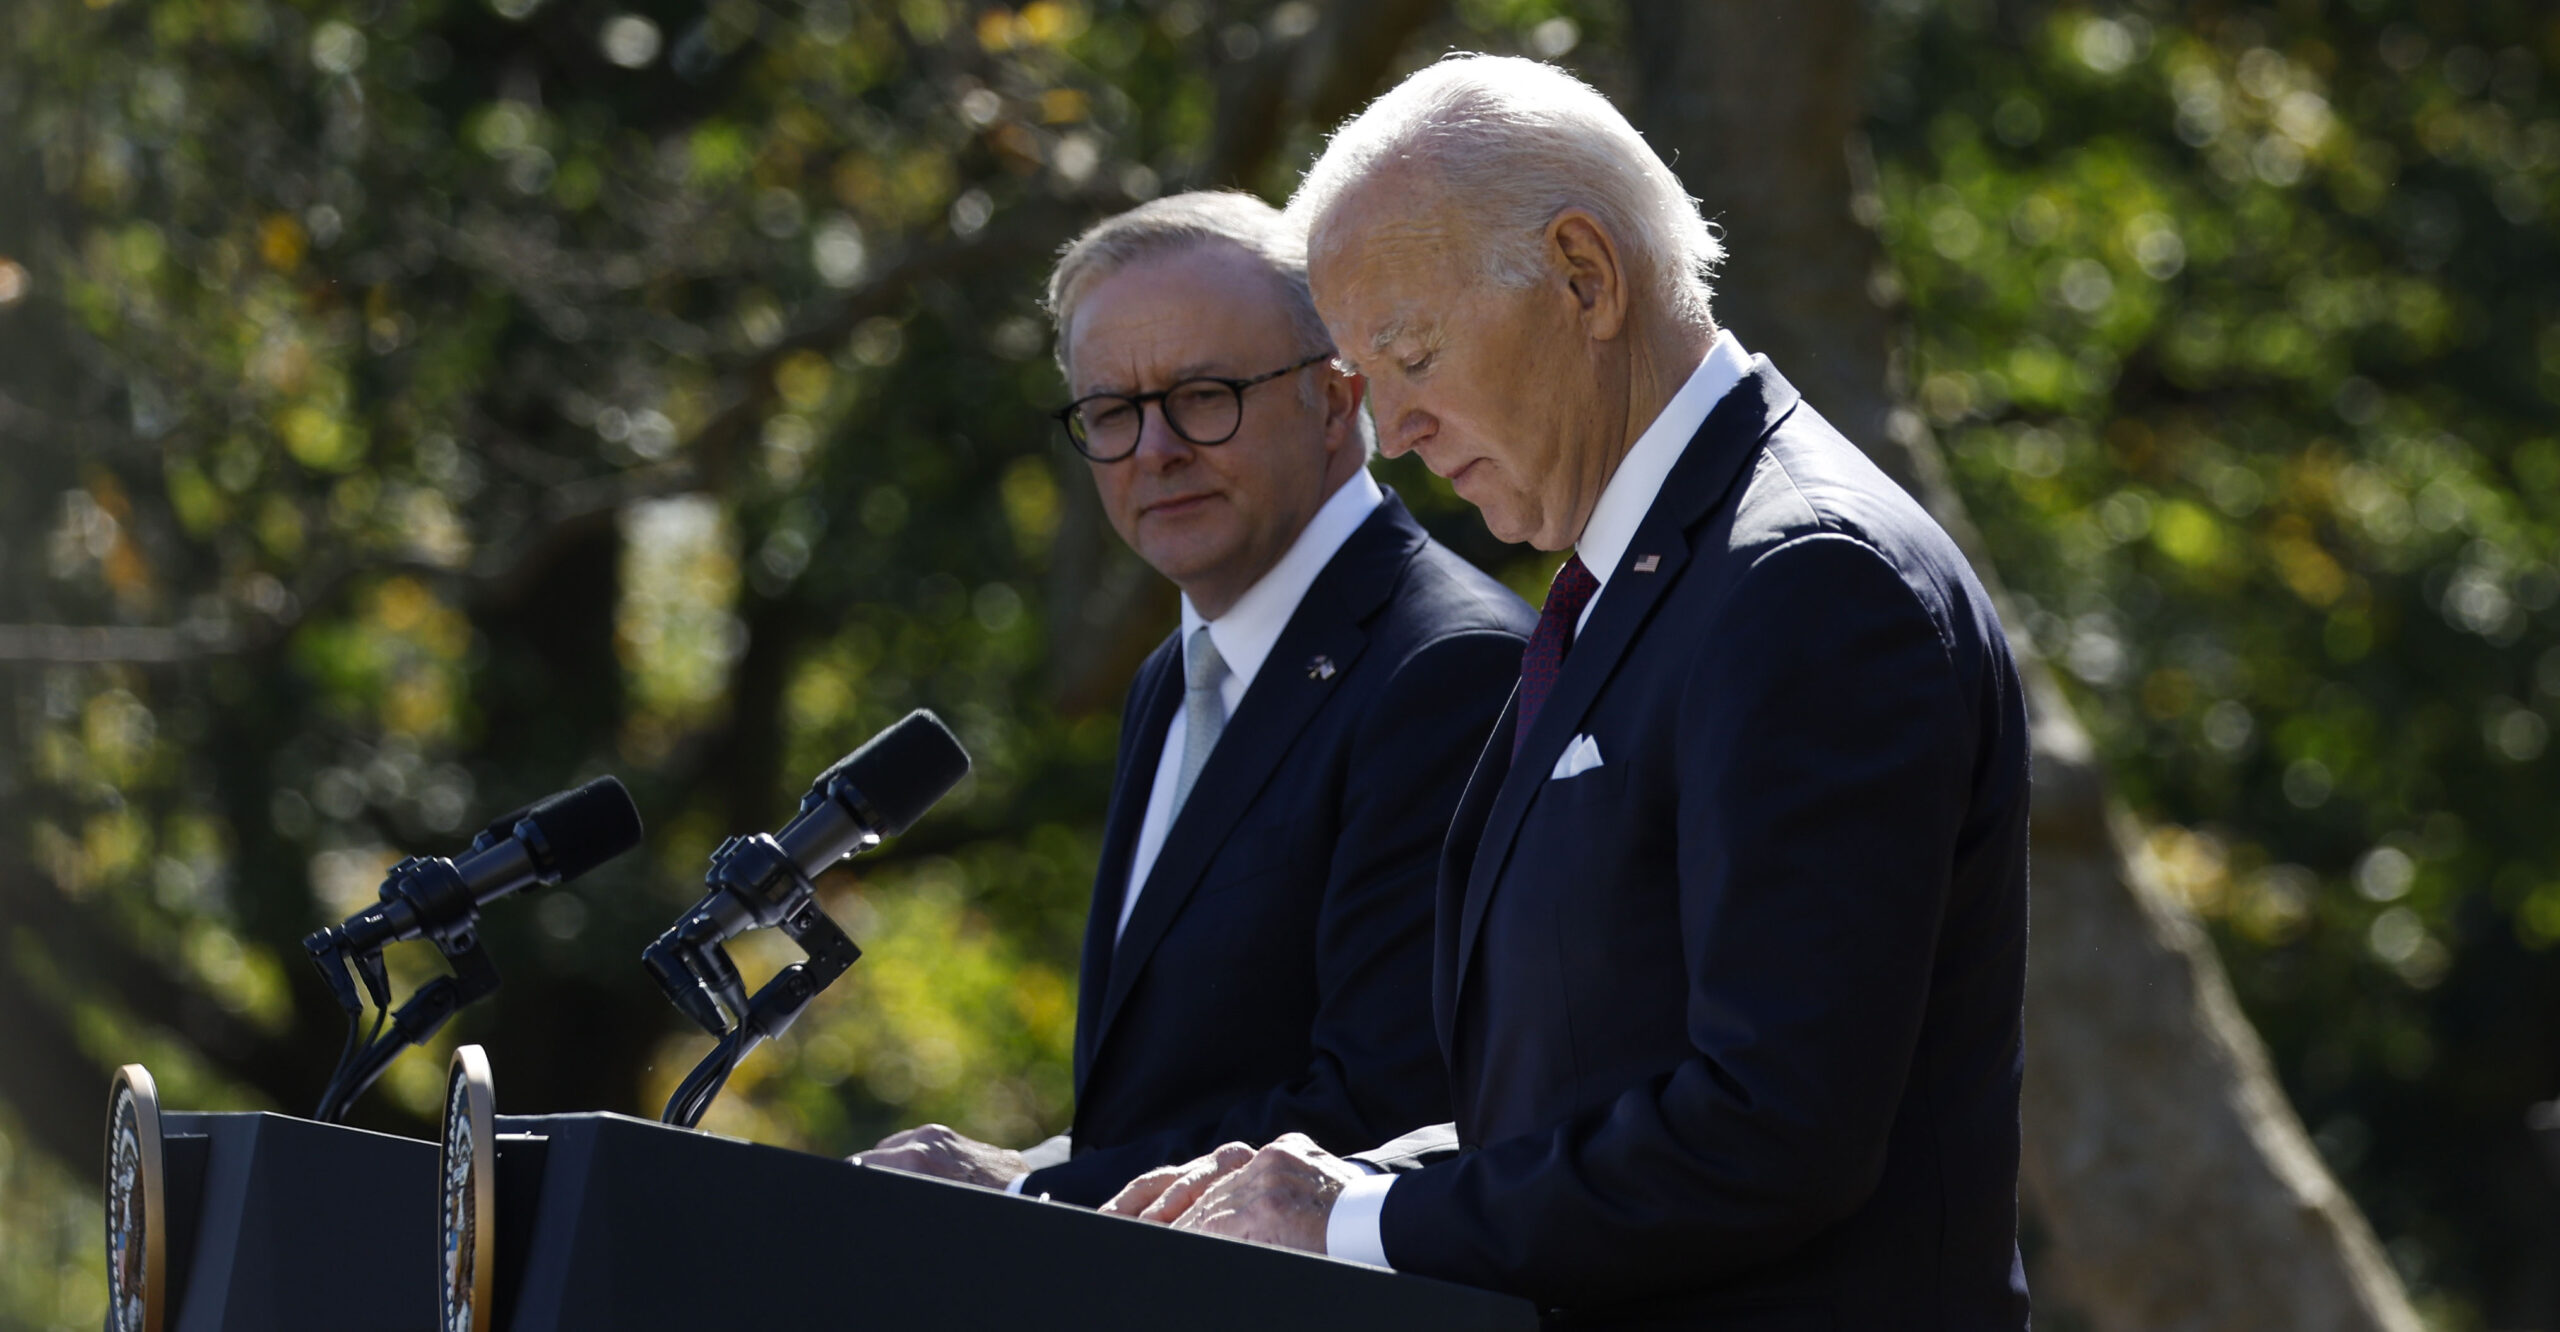 What Biden Has to Say About New House Speaker, Hamas, China